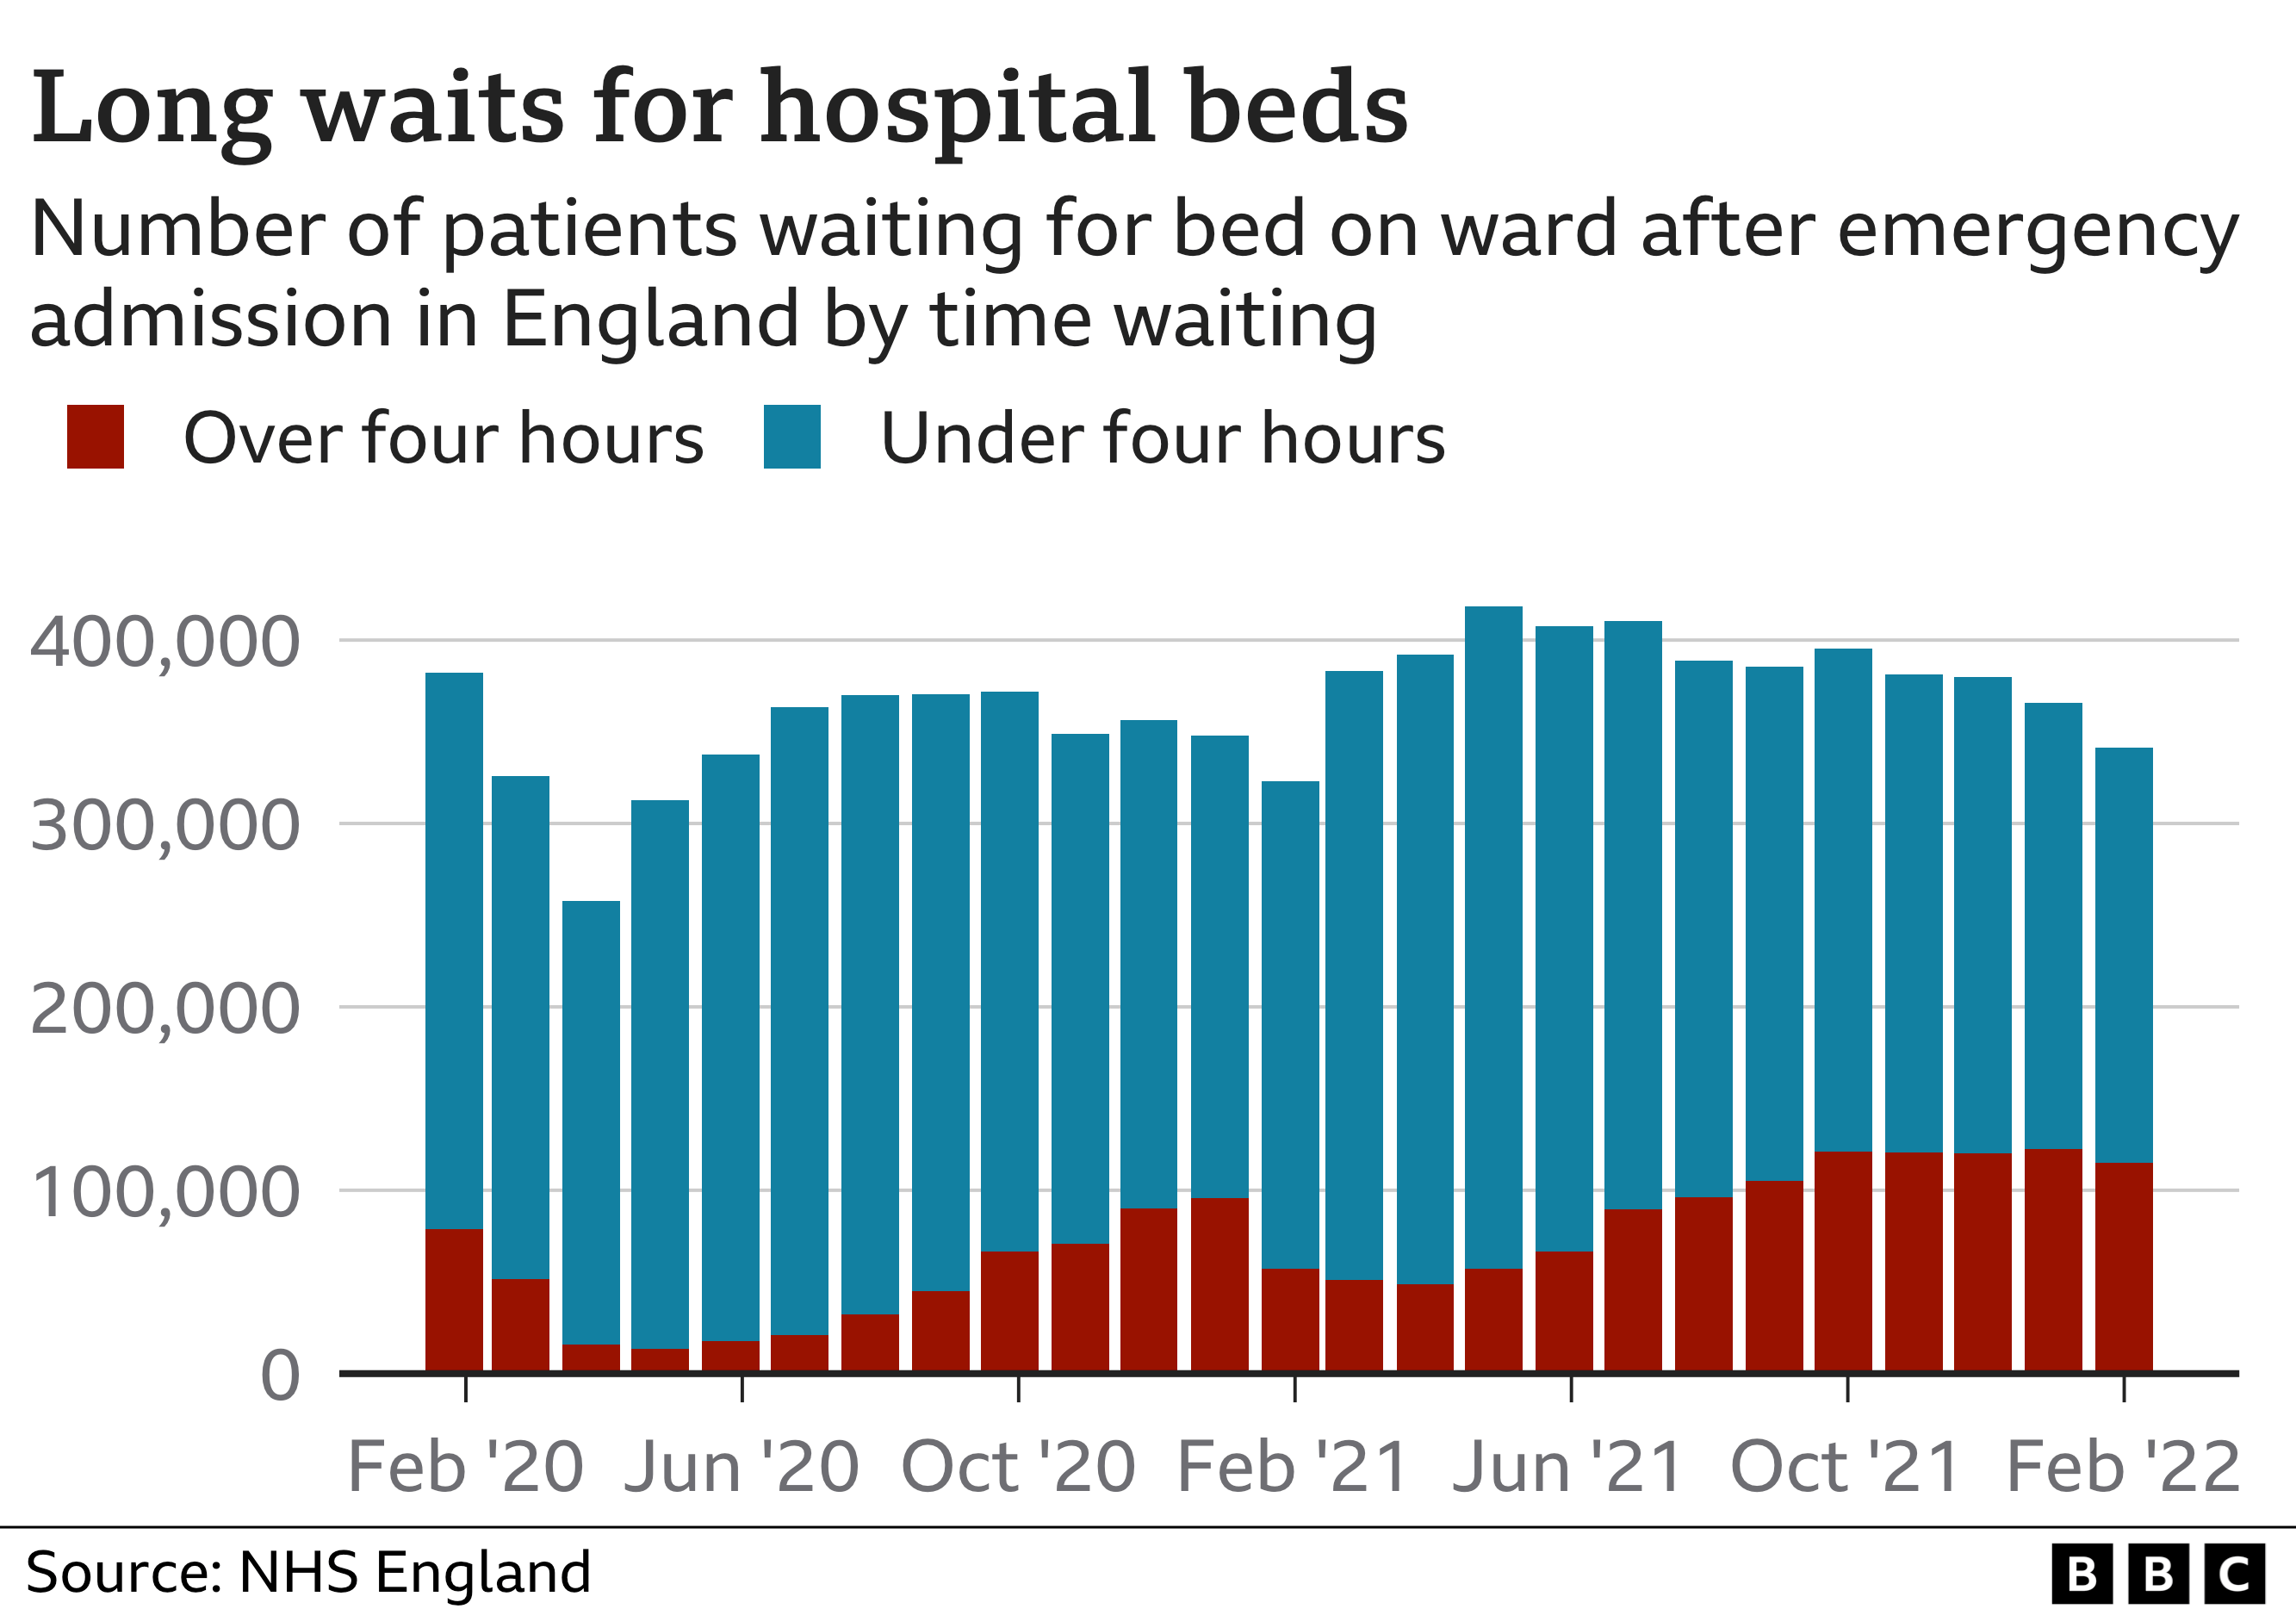 Chart showing bed waits